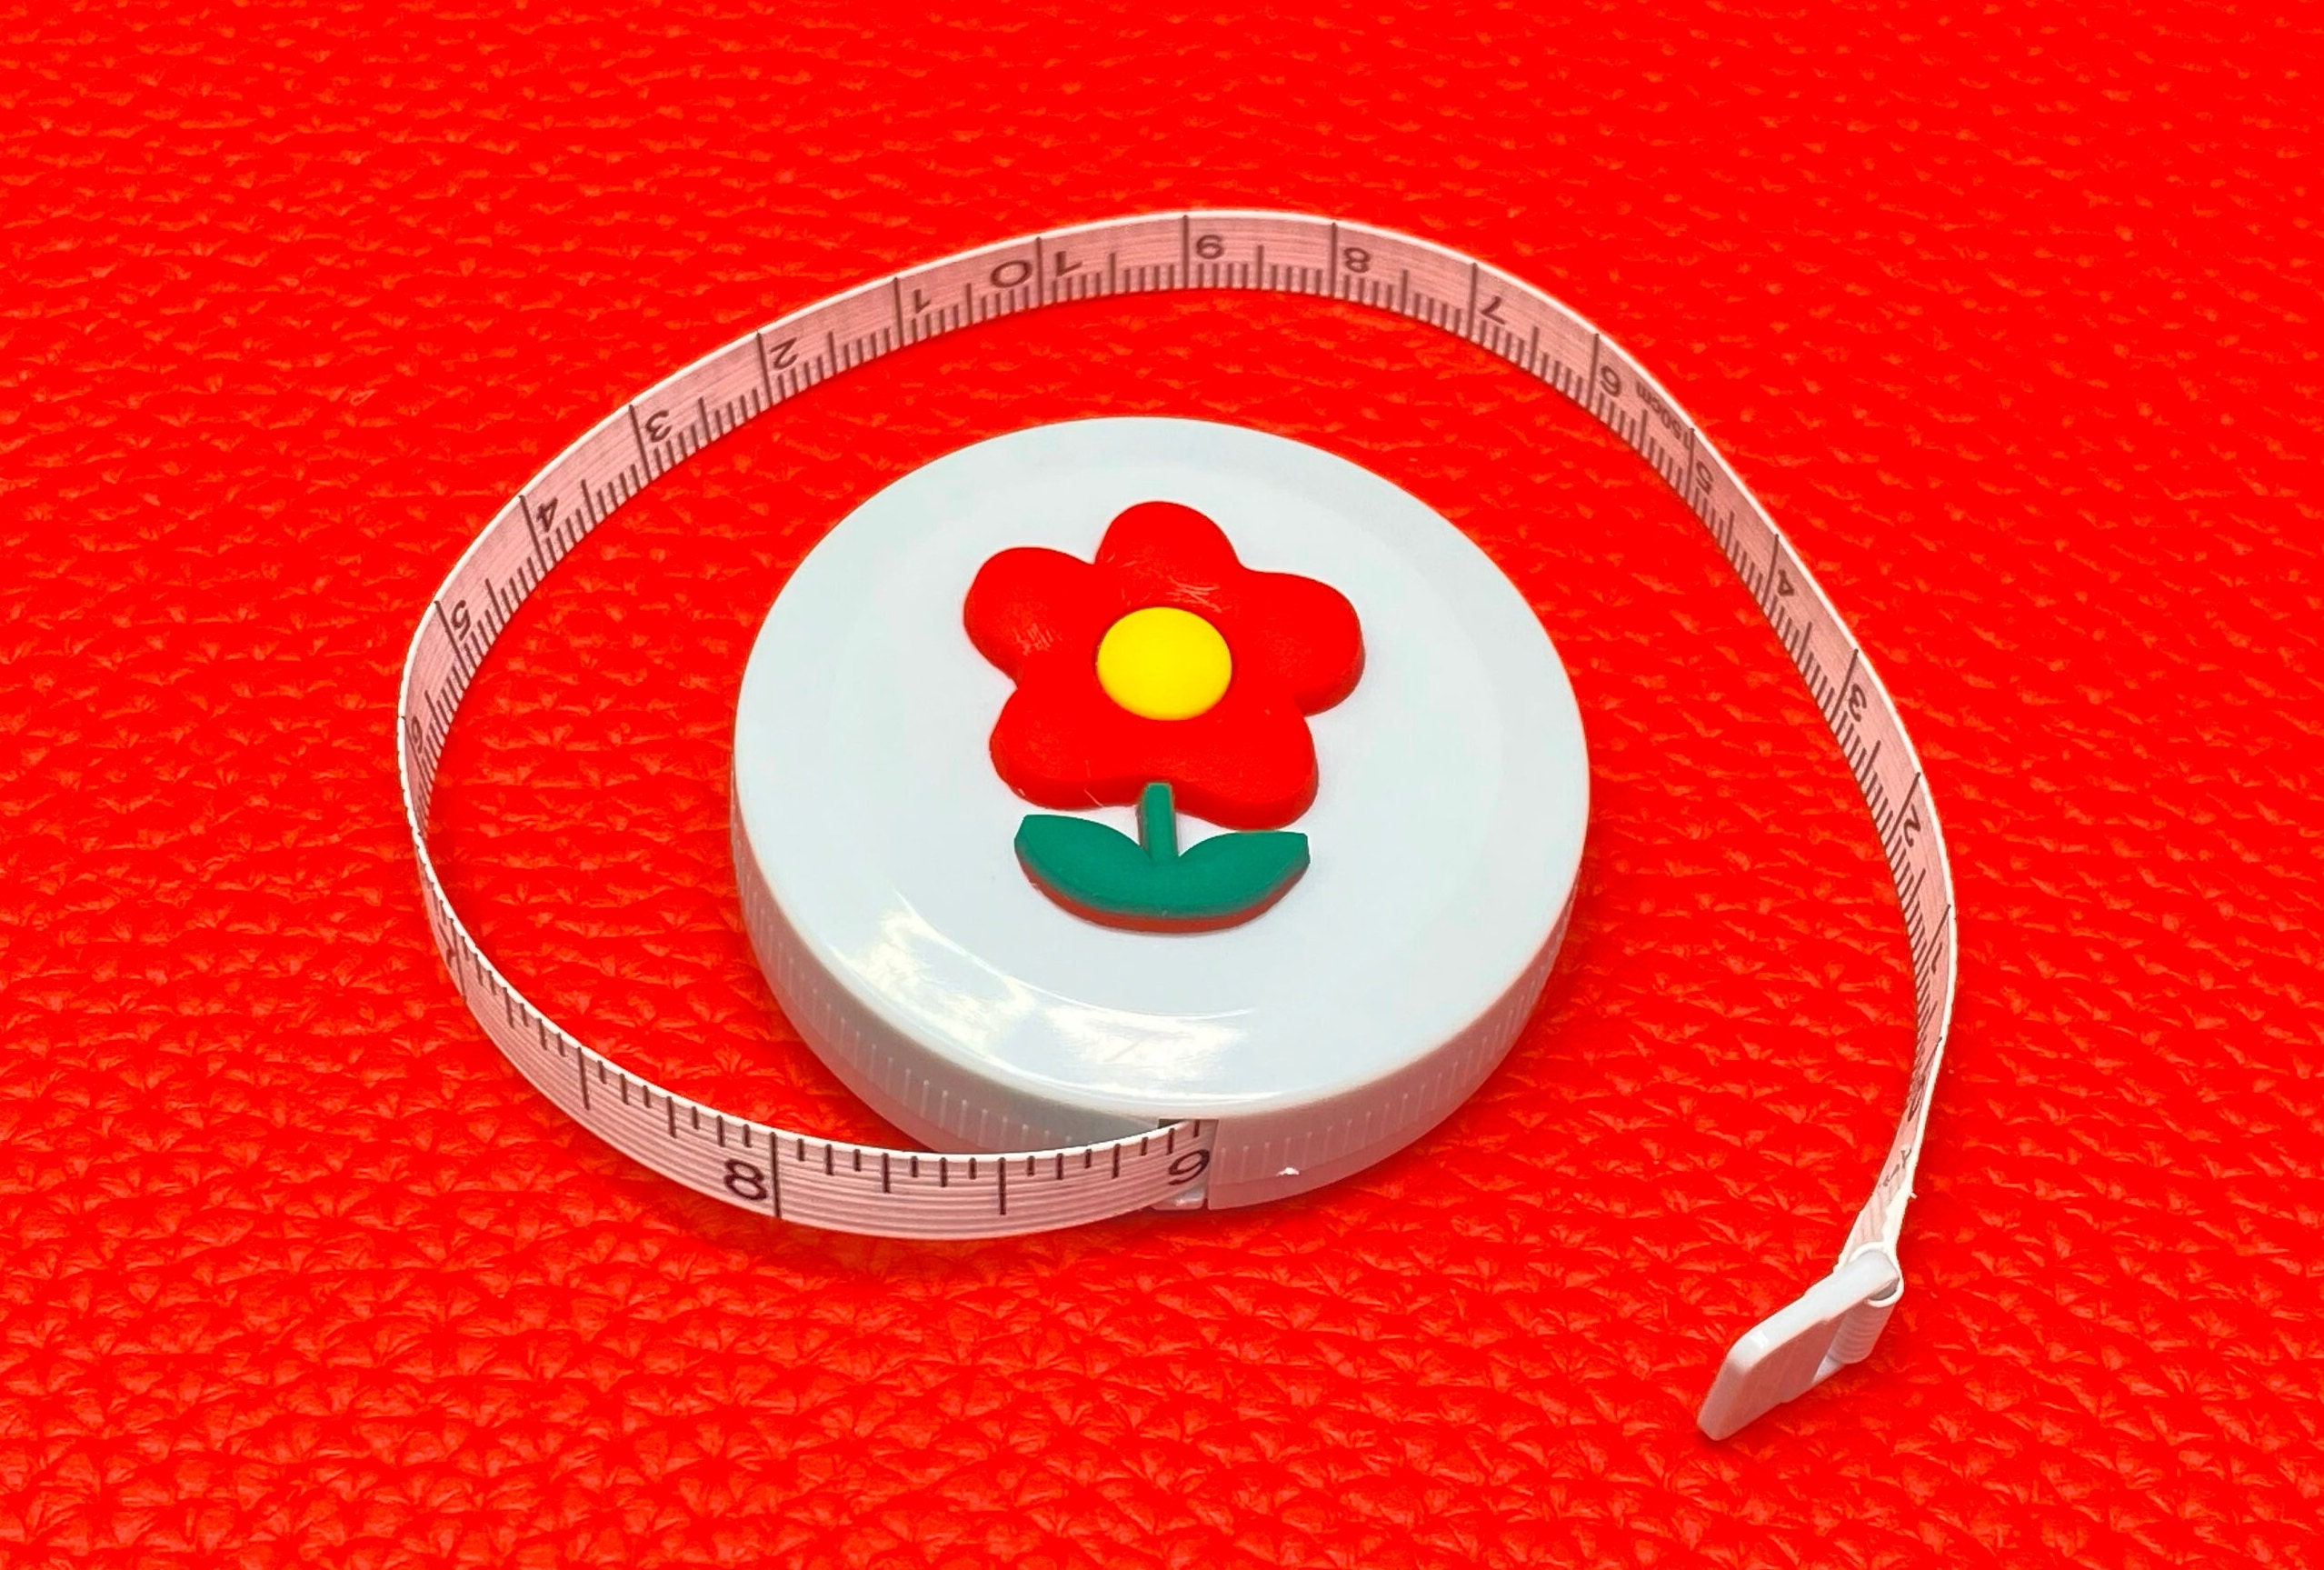 1pc Automatic Measuring Body Tape Measure For Waist, Arms, Legs, Head, Soft  Ruler, Cloth Sewing Tape Measure